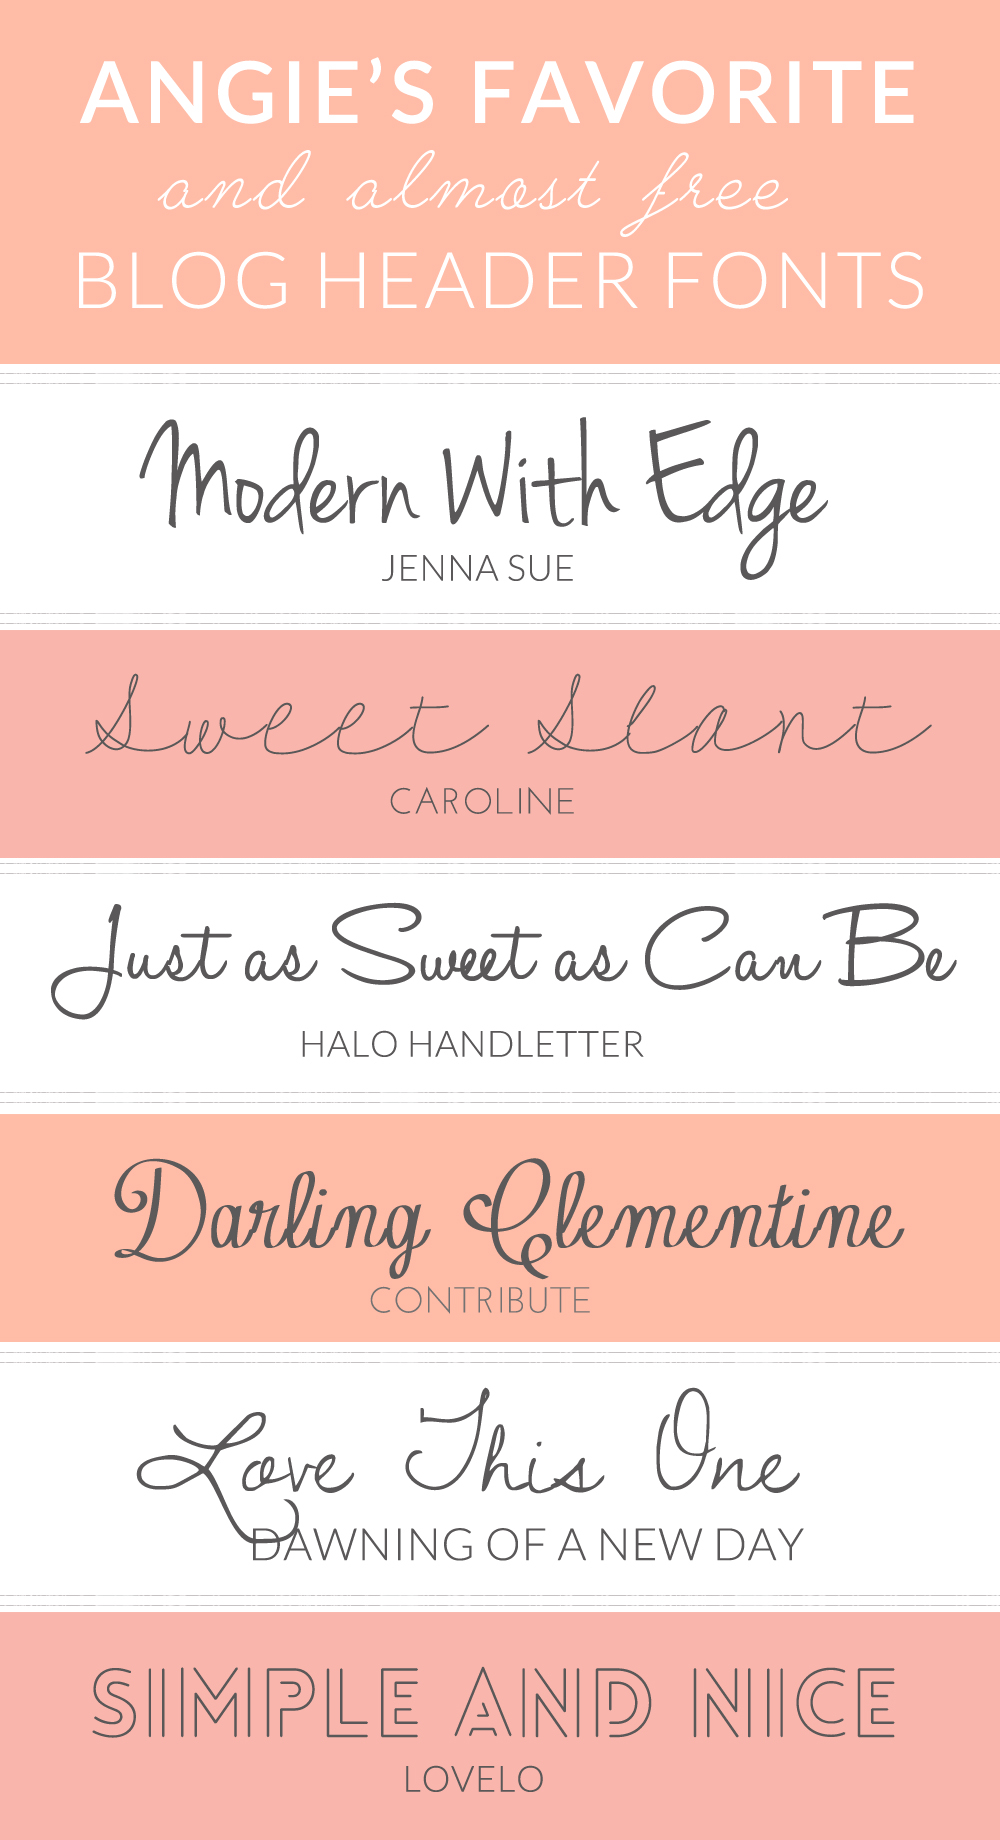 Here are My Favorite and Free Fonts For Blog Headers - Angie Makes